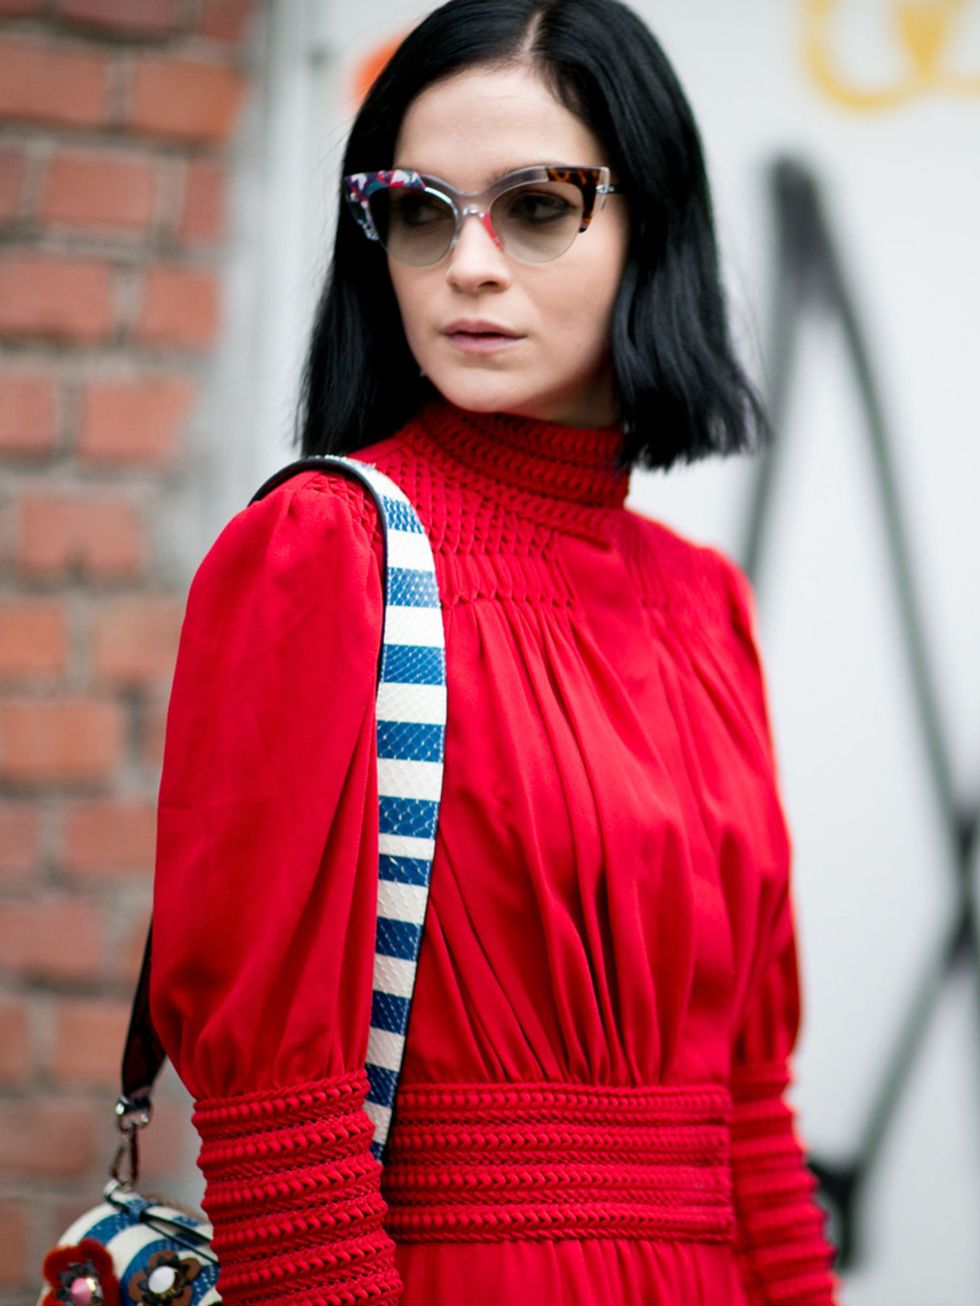 Eyewear, Glasses, Vision care, Sleeve, Outerwear, Red, Sunglasses, Style, Street fashion, Fashion accessory, 